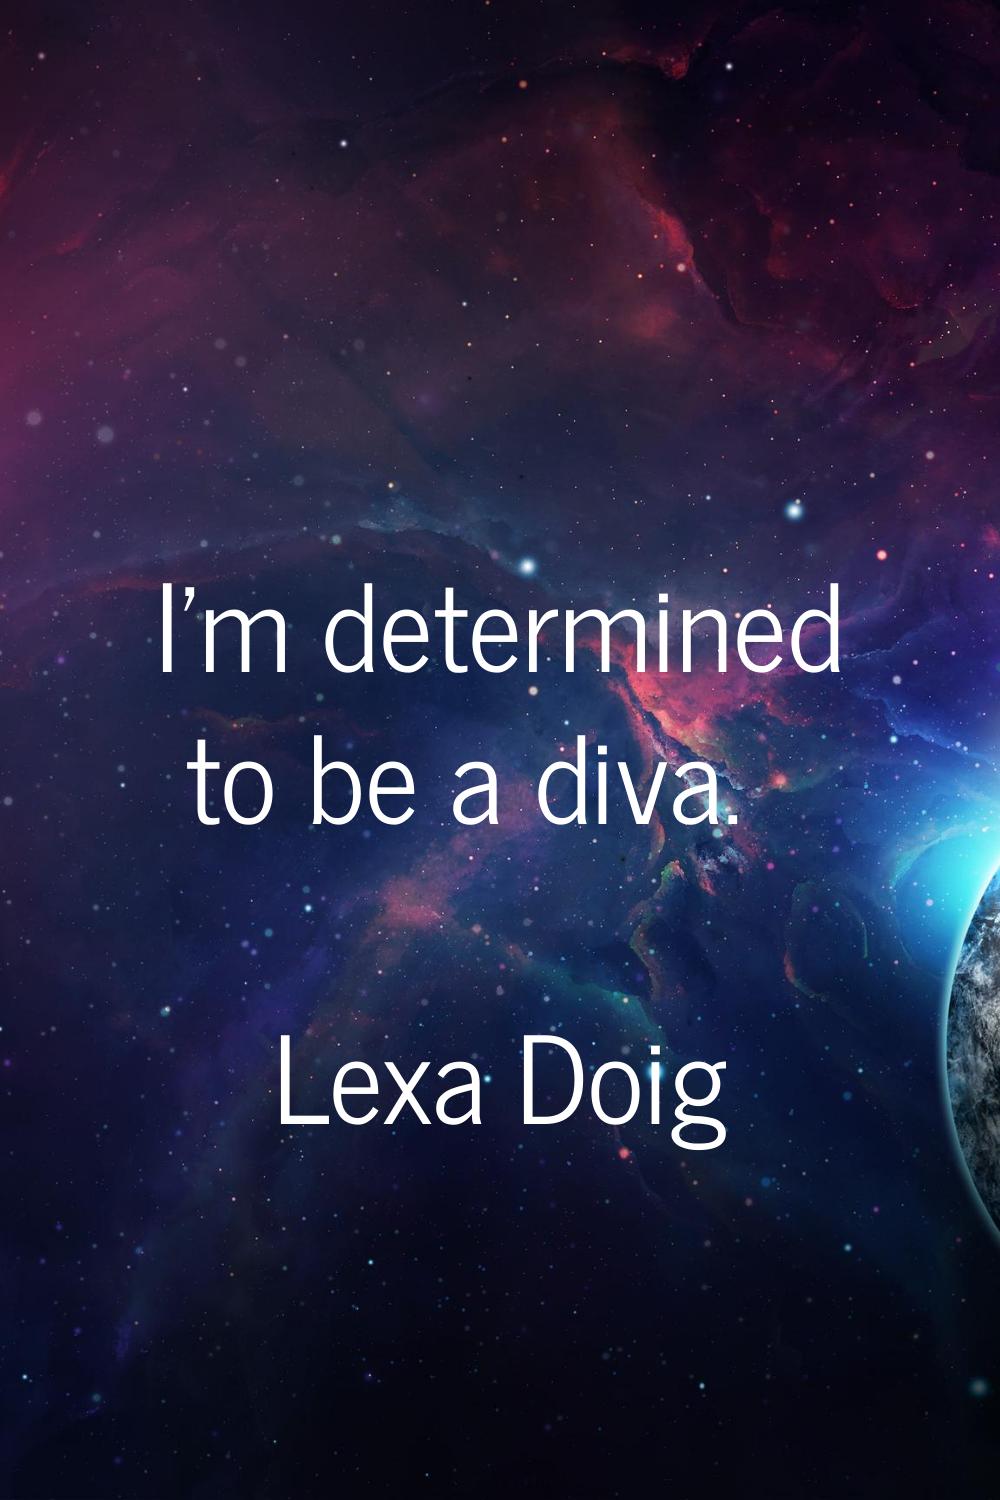 I'm determined to be a diva.